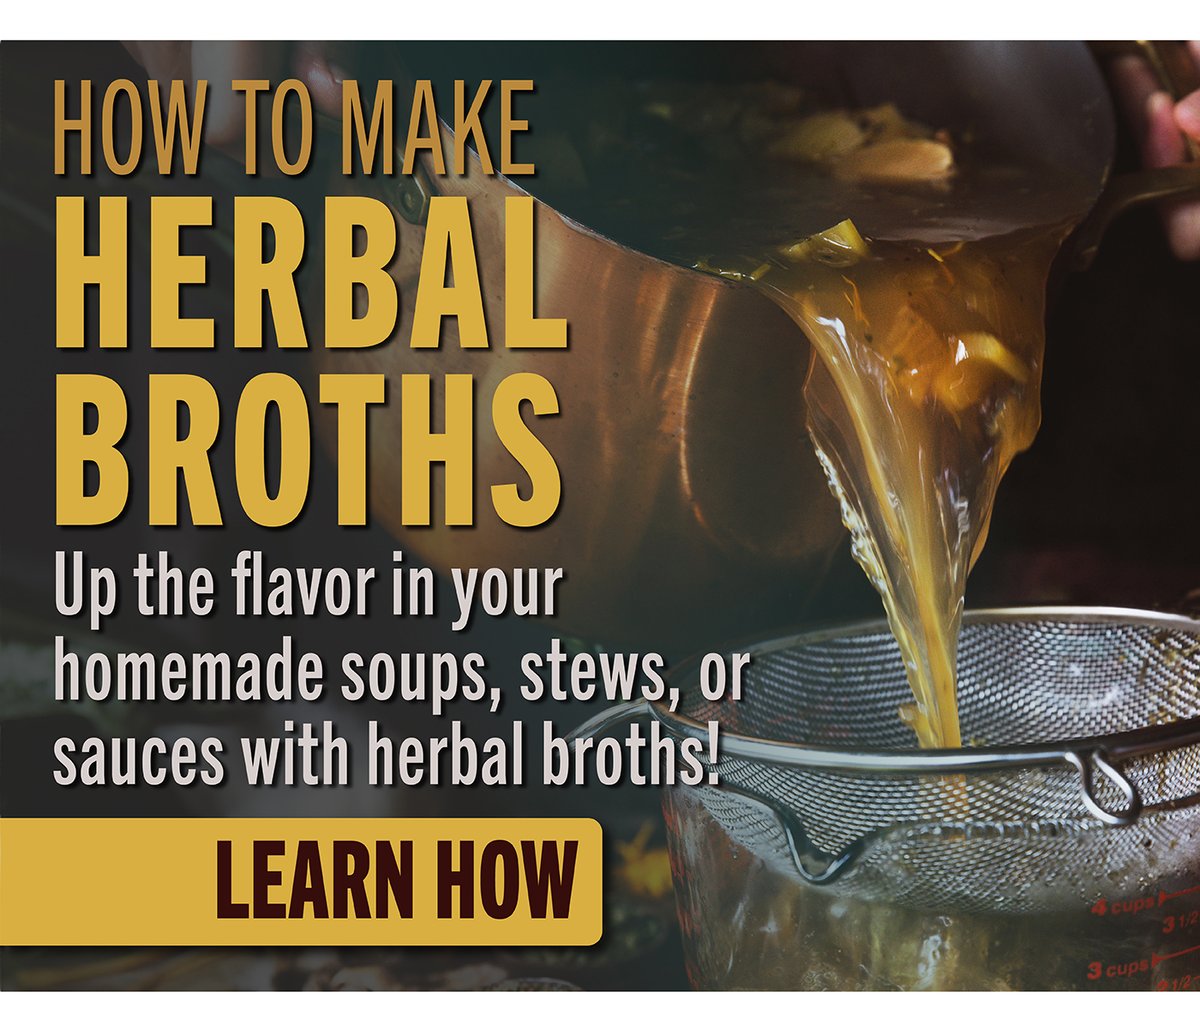 How to Make Herbal Broths-Learn More